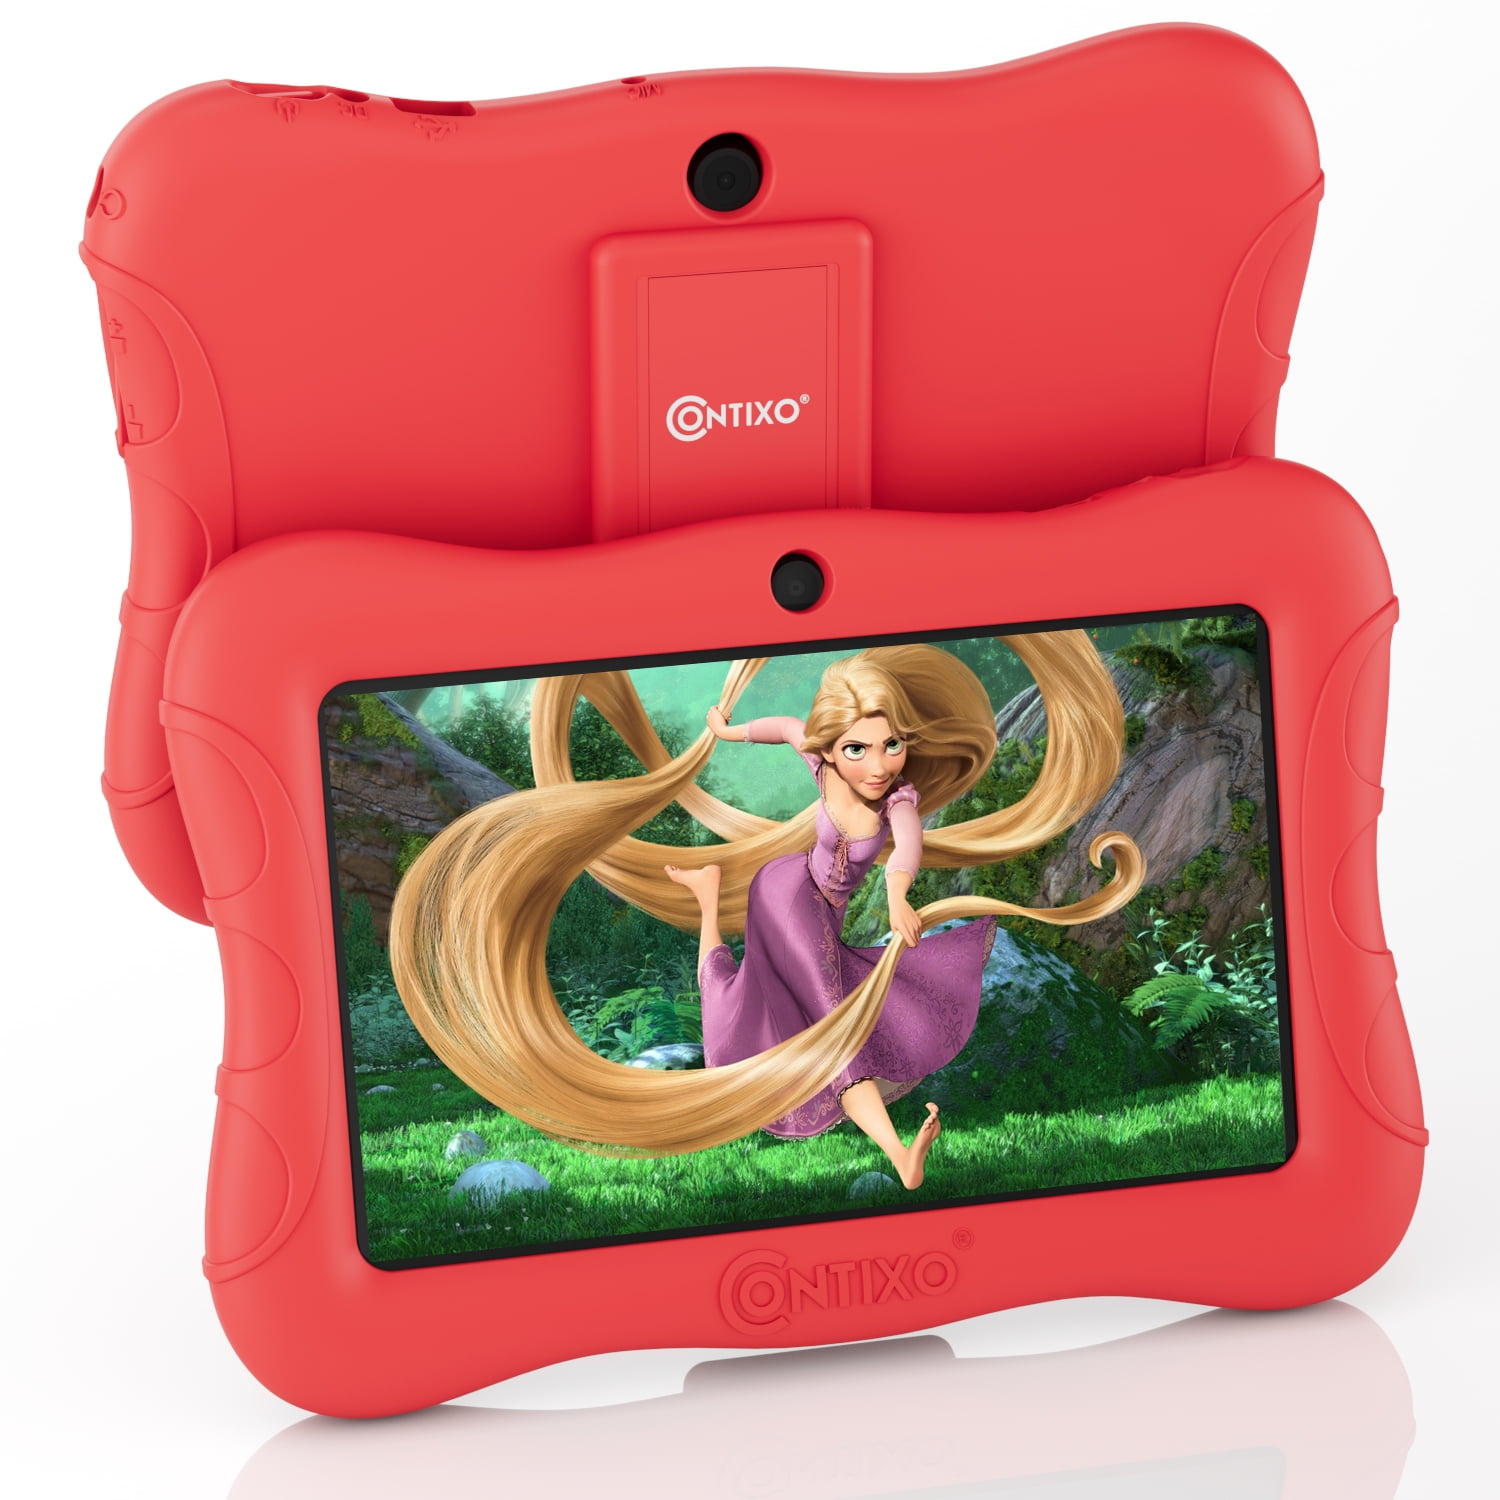 Contixo Kids Tablet with over $150 value of pre-installed Teacher Approved Apps, Android, 7", 32GB Storage, Learning Tablet with Parental Control, Kid-Proof Protective Case, age 3-8, V9-3-32-Red